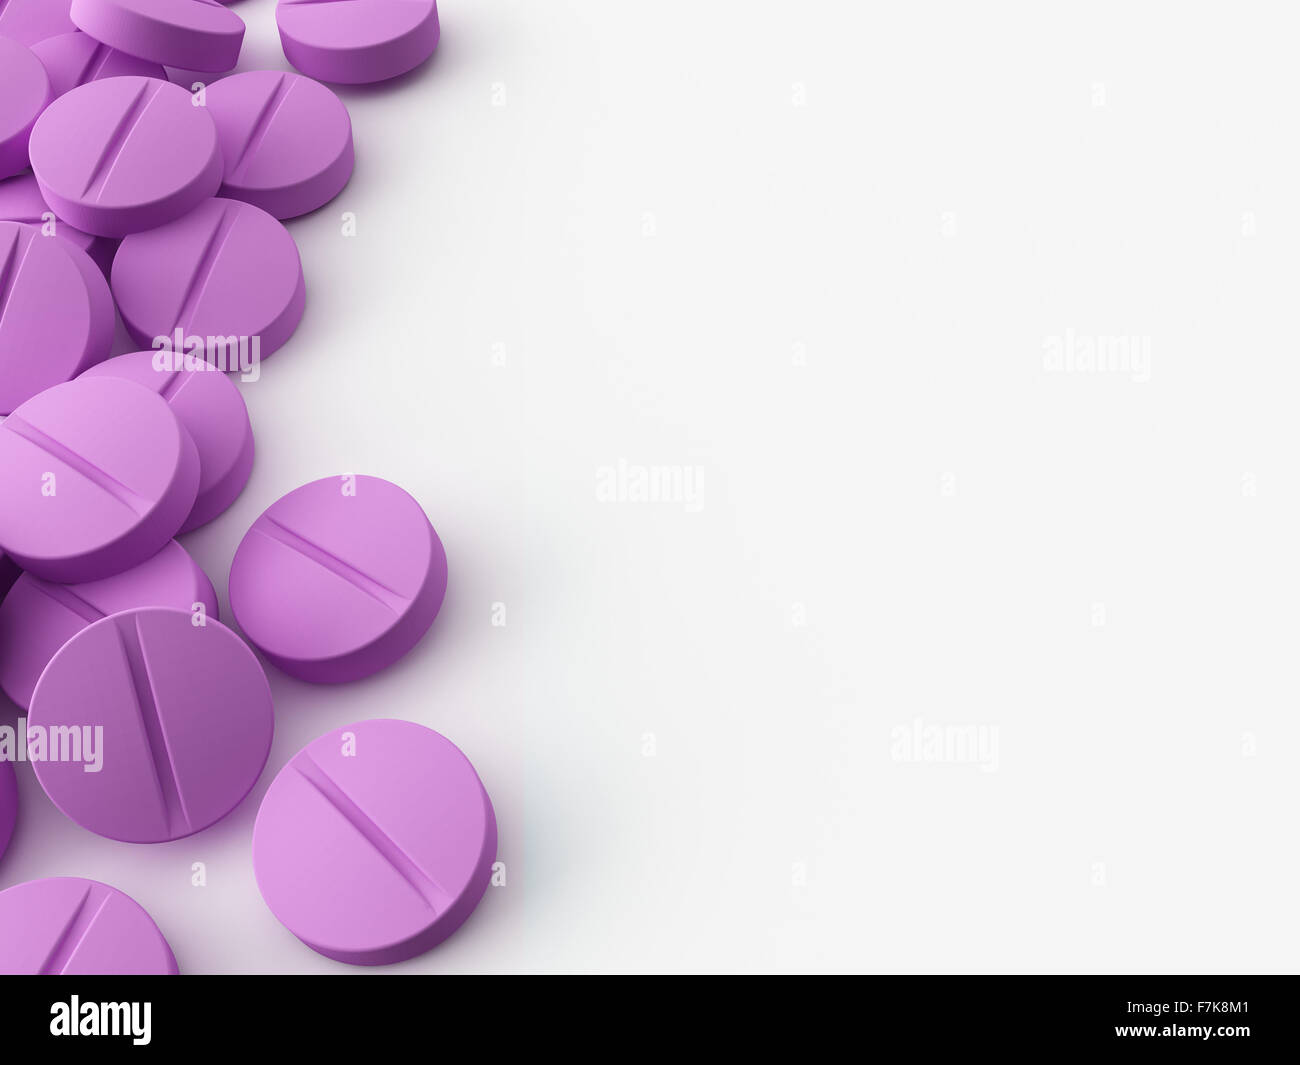 some 3d maded pills on a white background Stock Photo